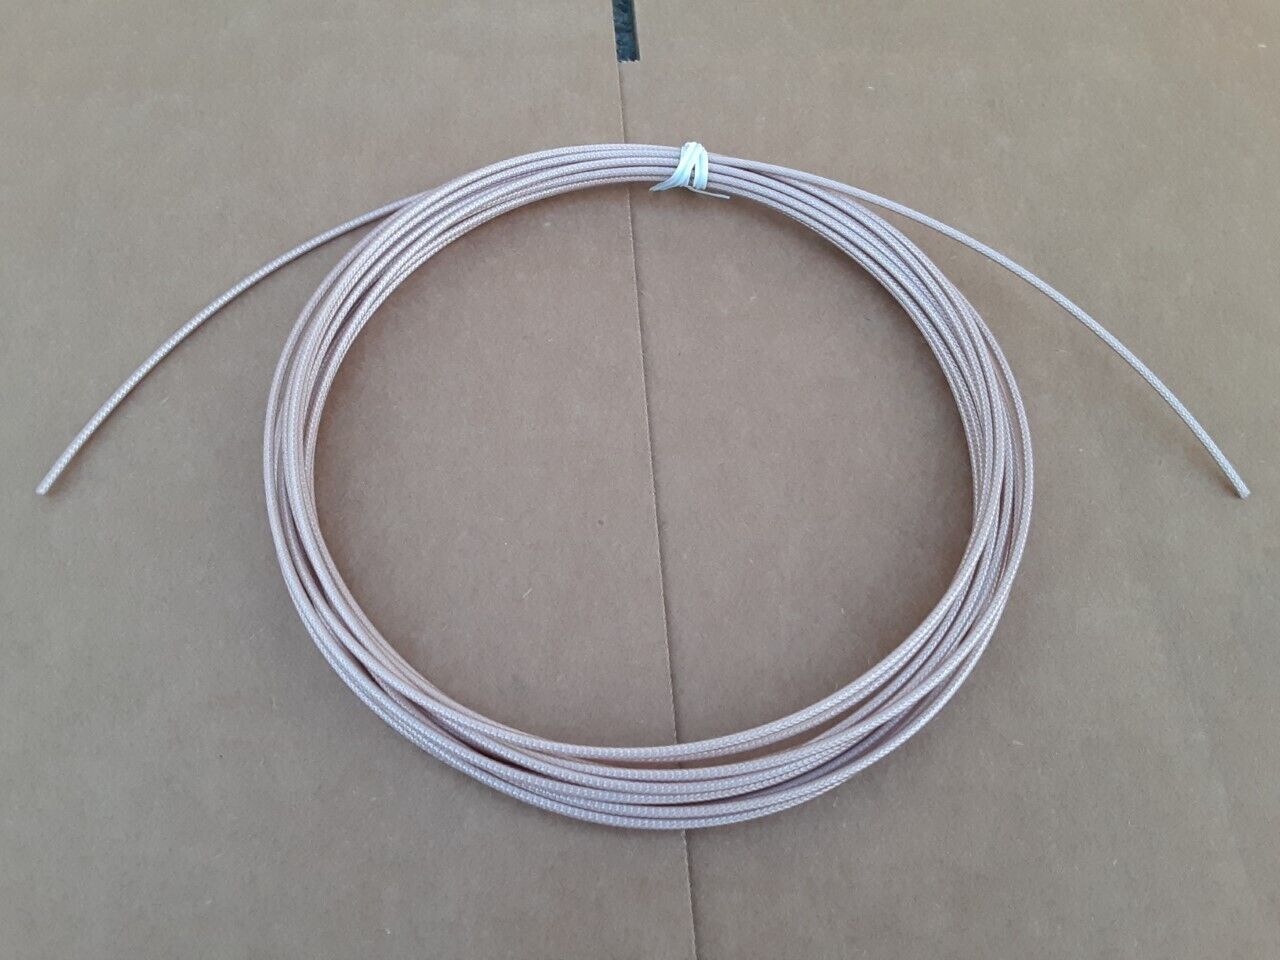 RG-179 75 Ohm High Temperature SDI- Video Coax Cable, Without Connectors lot. Available Now for 15.00